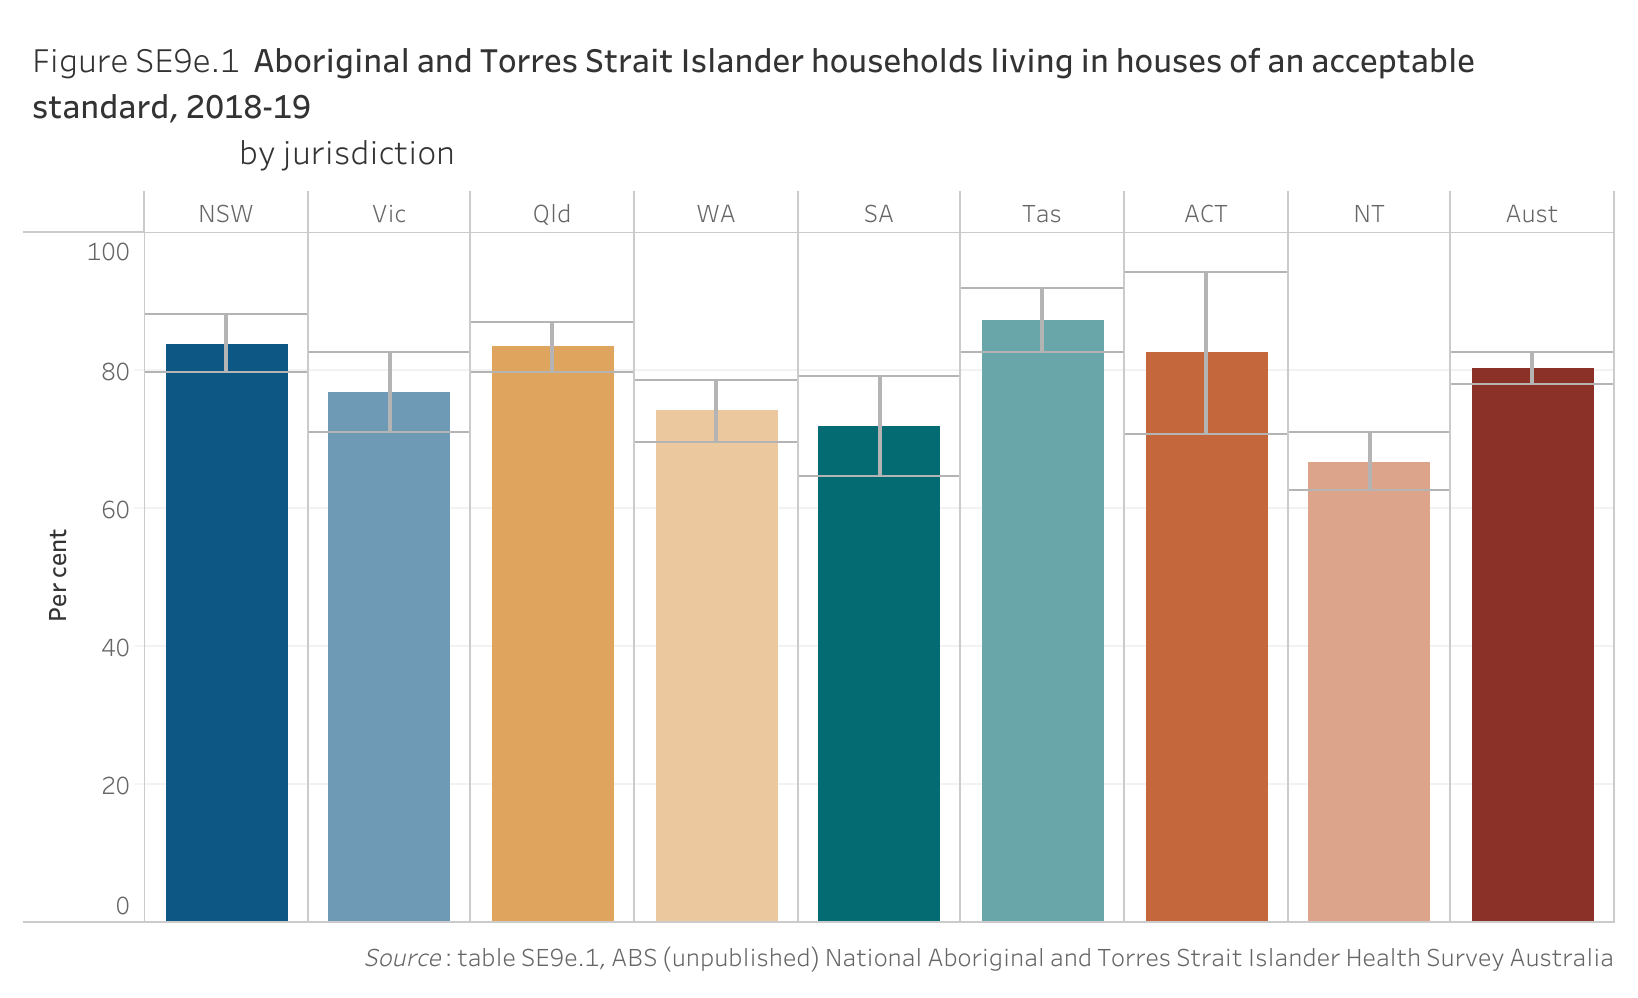 Figure SE9e.1 shows Aboriginal and Torres Strait Islander households living in houses of an acceptable standard, 2018-19, by jurisdiction. More details can be found within the text near this image.